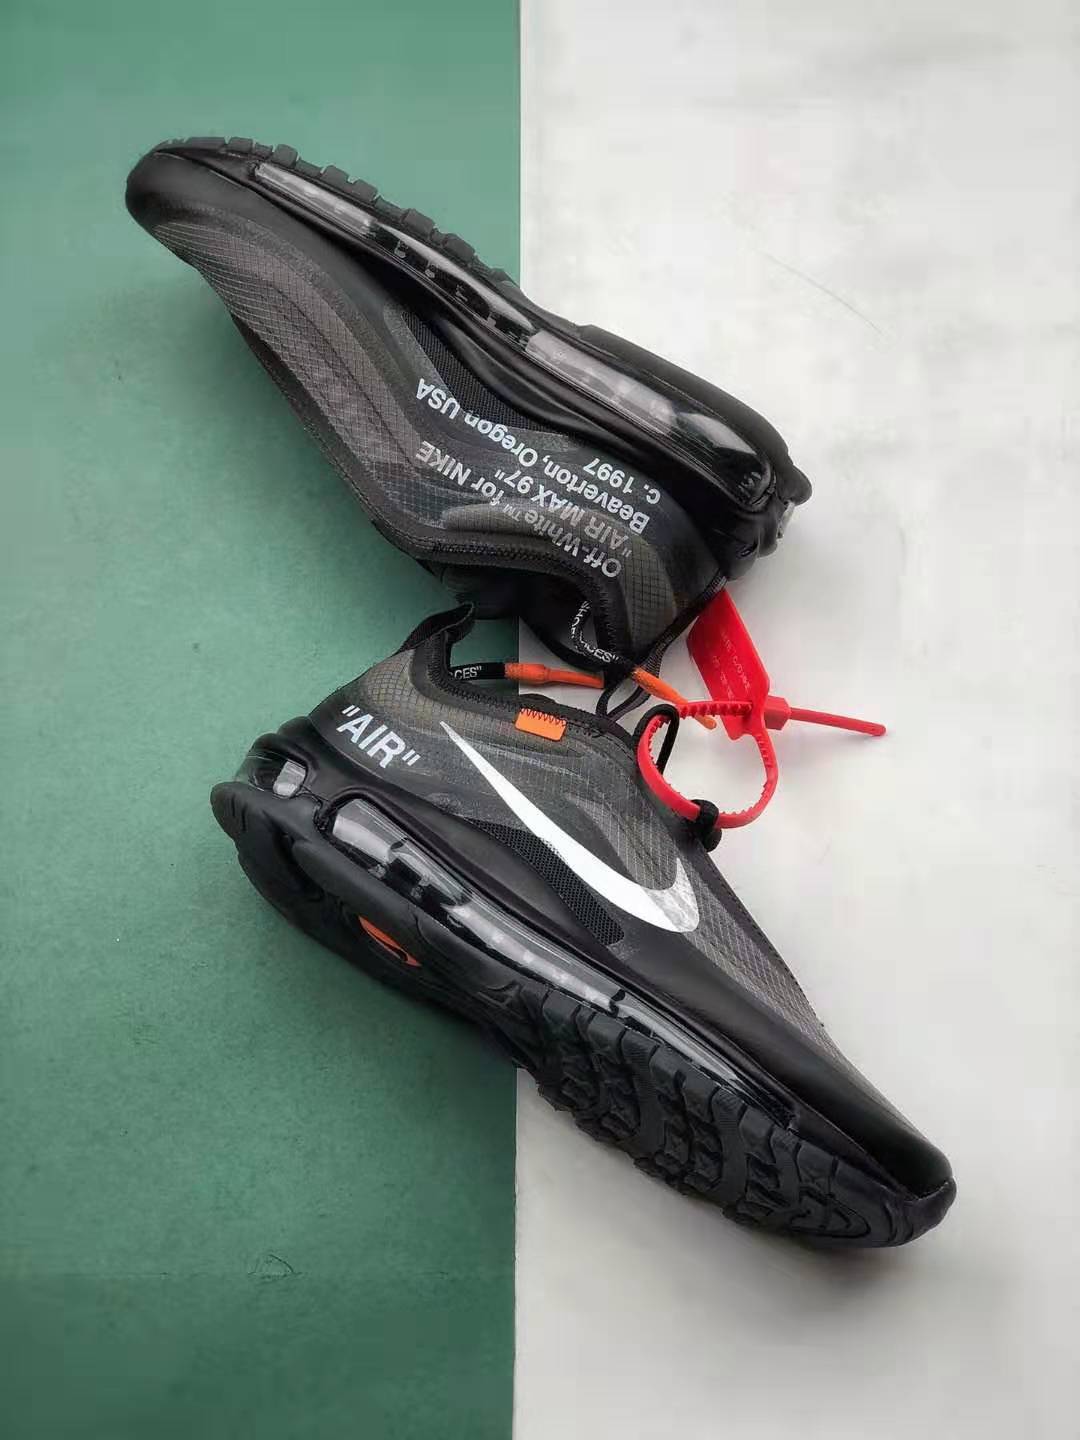 Nike Off-White x Air Max 97 'Black' AJ4585-001 - Limited Edition Sneaker Available Now